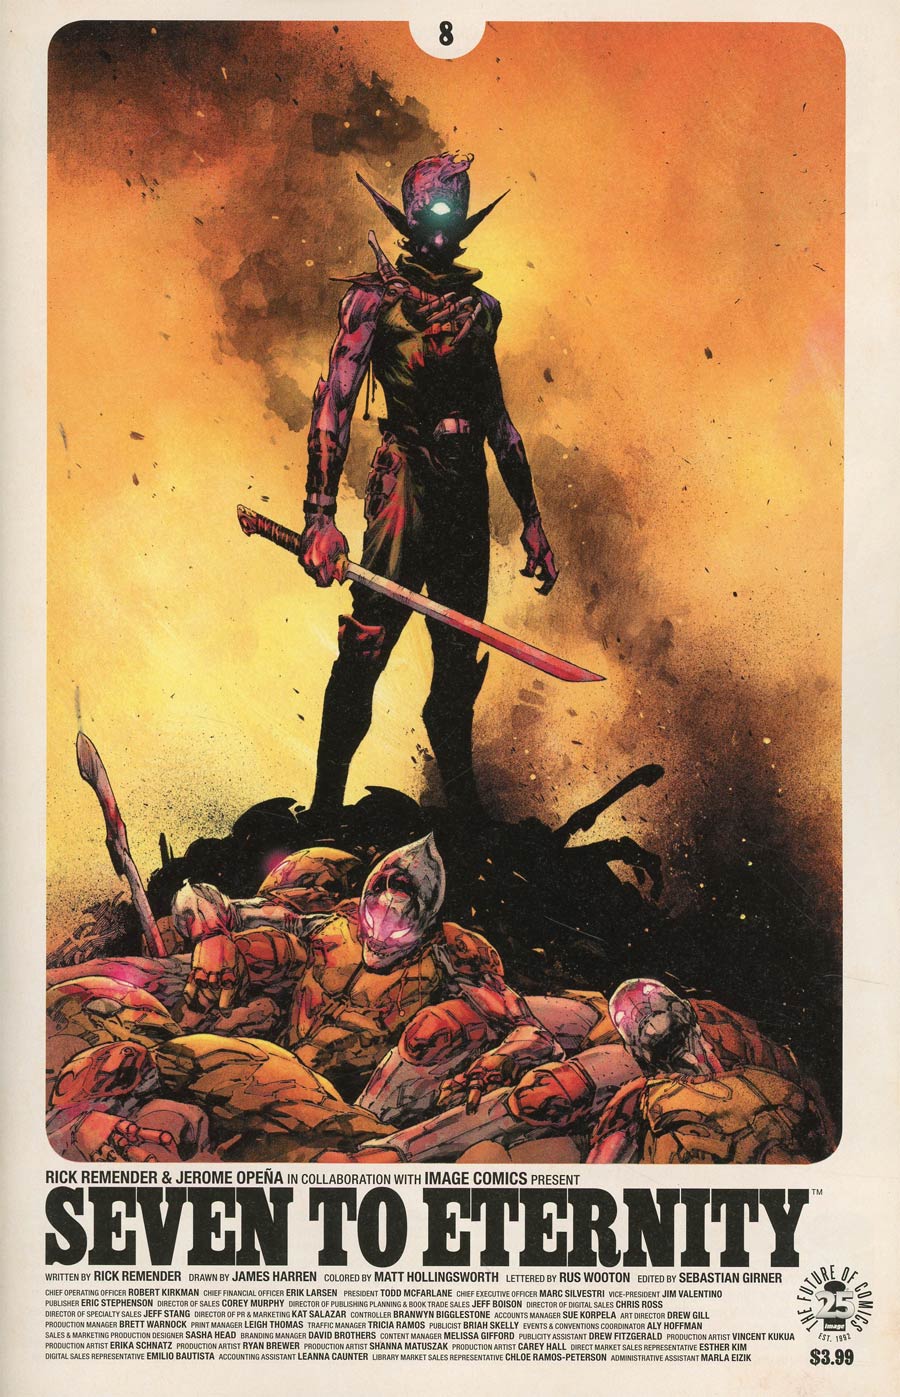 Seven To Eternity #8 Cover A Jerome Opena & Matt Hollingsworth